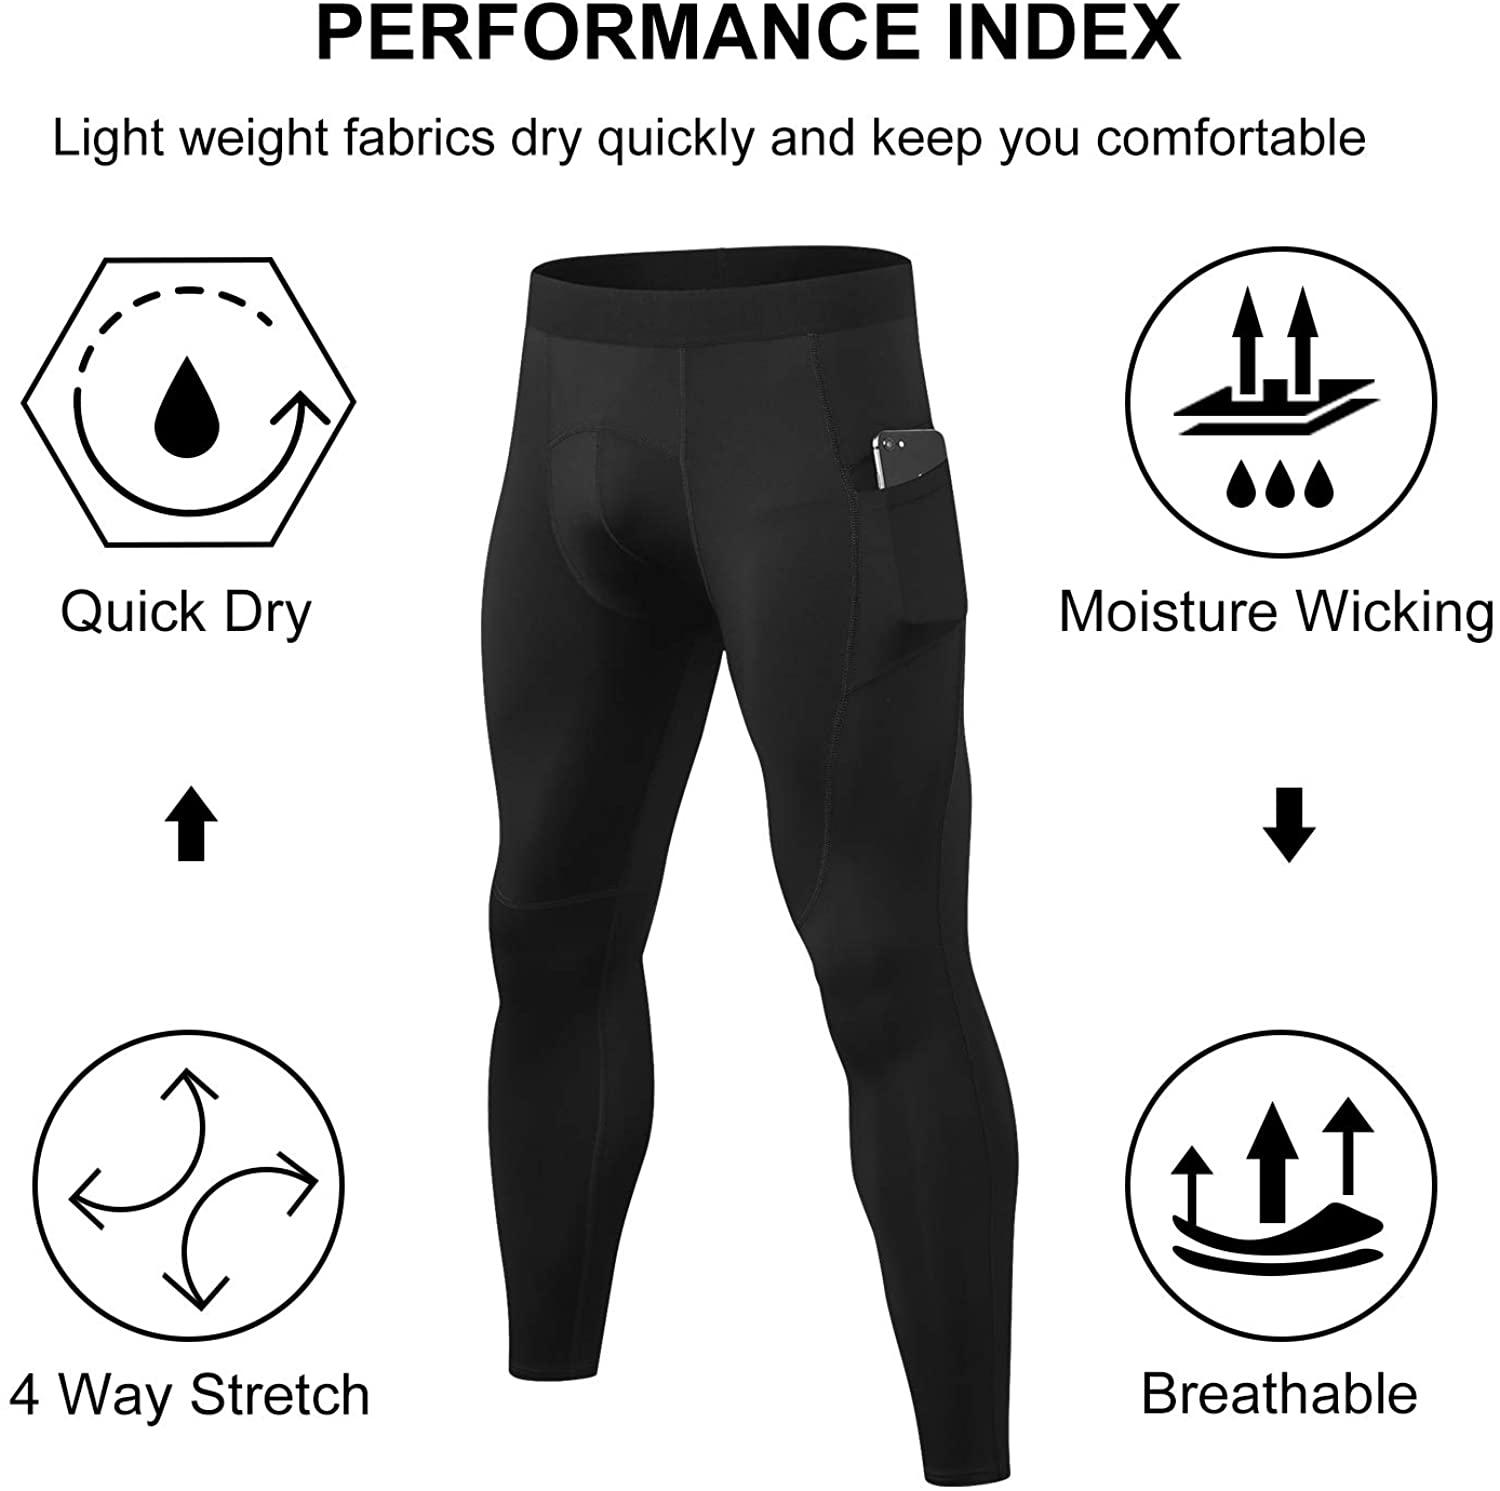 Men's Compression Baselayer Pants Running Tights Trousers with Phone Pocket